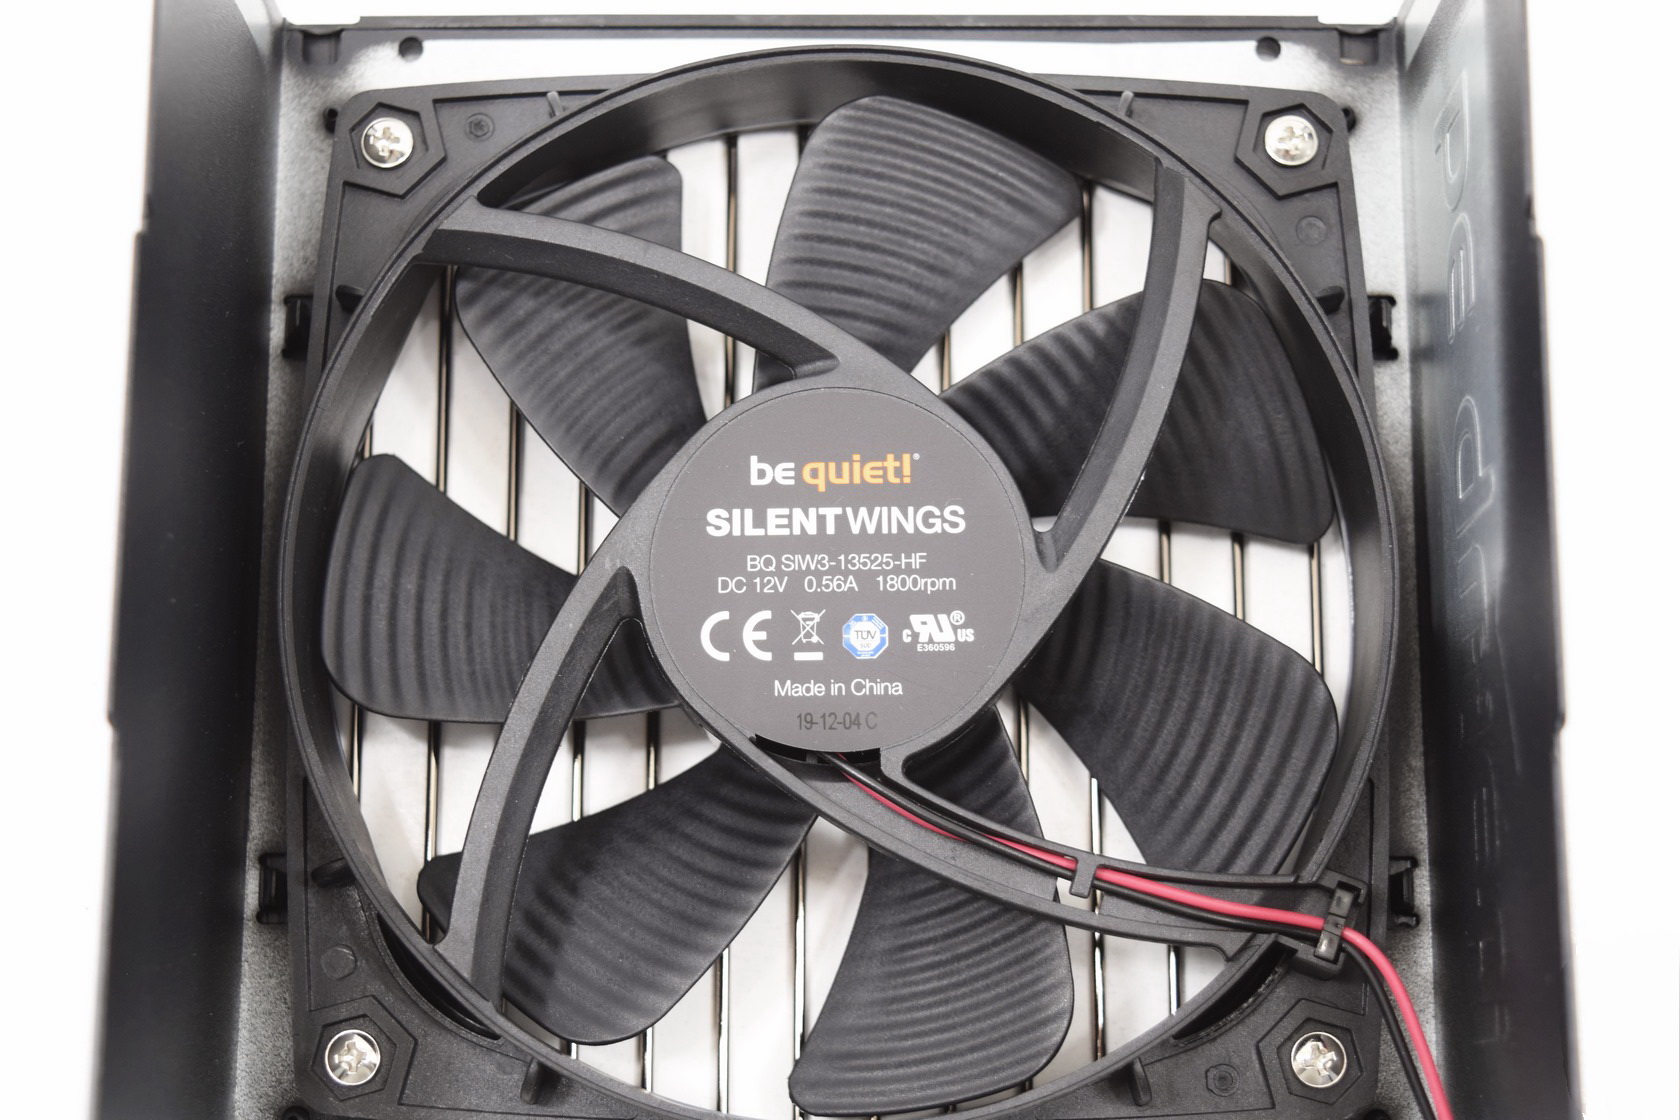 The Be Quiet! Straight Power 11 750W PSU - The Be Quiet! Straight Power 11  750W PSU Review: Excellent Quality, But Not Quiet